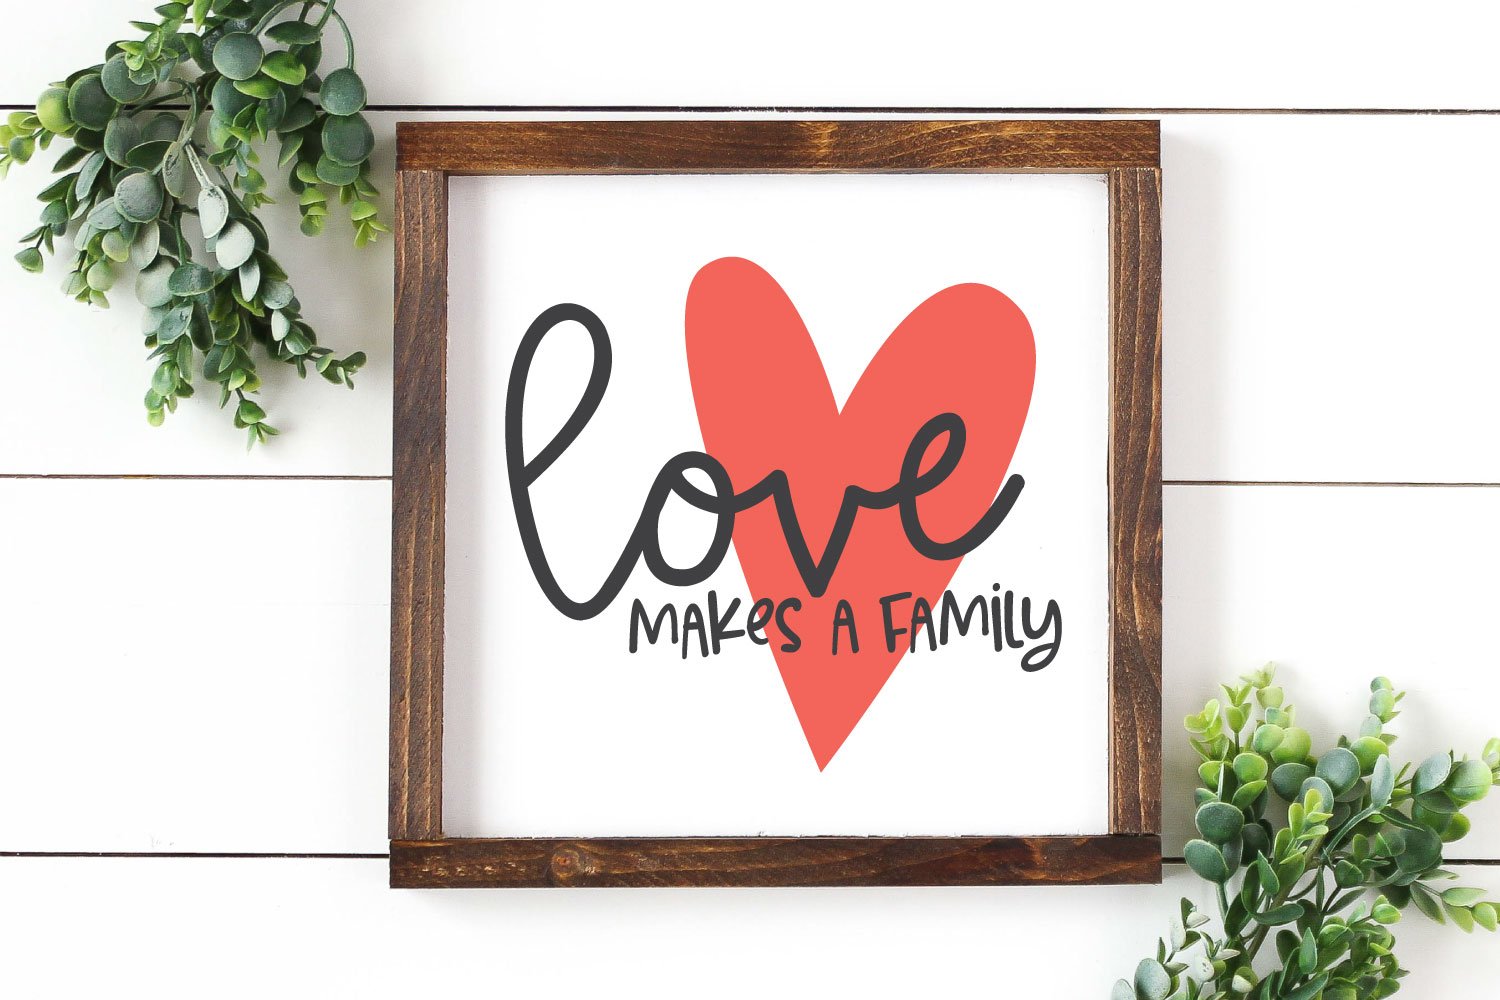 Love Makes a Family SVG on home decor sign with greenery